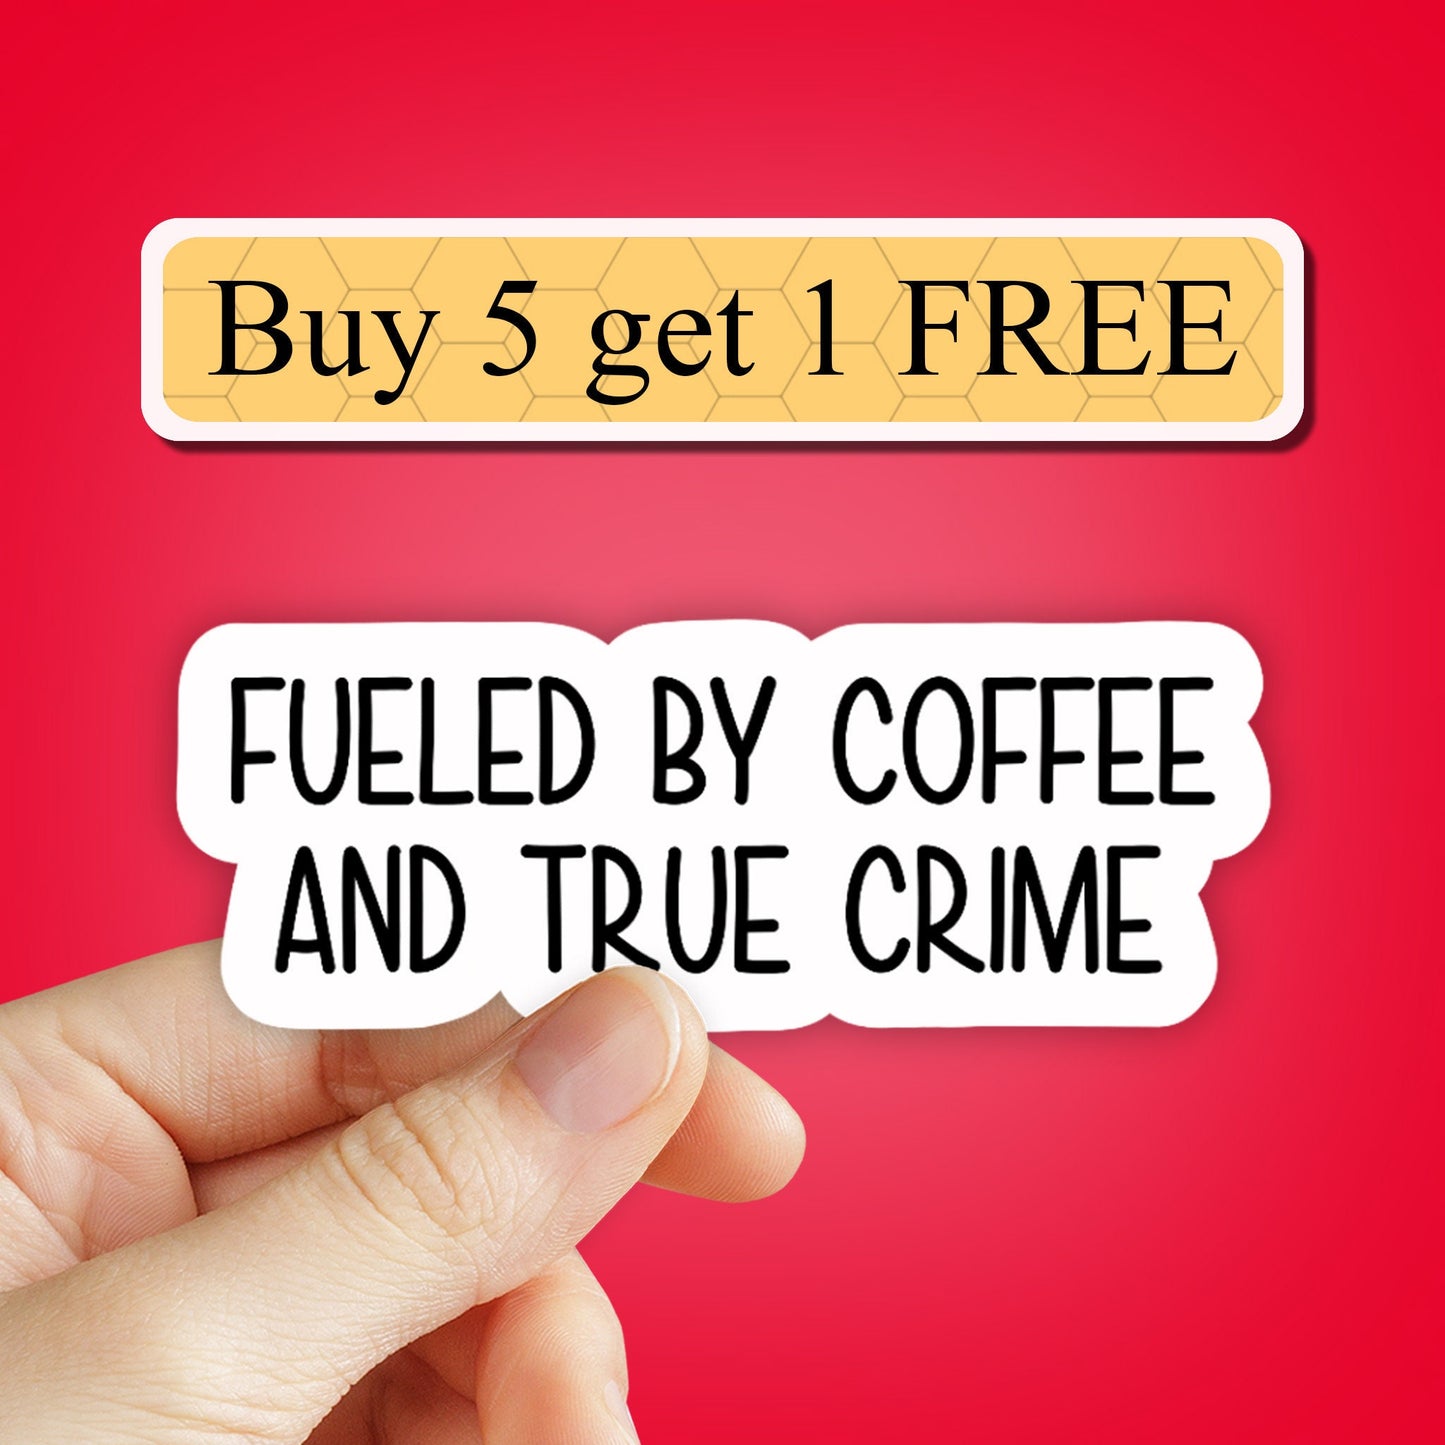 Fueled by coffee and true crime stickers, true crime podcast stickers, True crime junkie sticker pack, Laptop stickers, water bottle decal